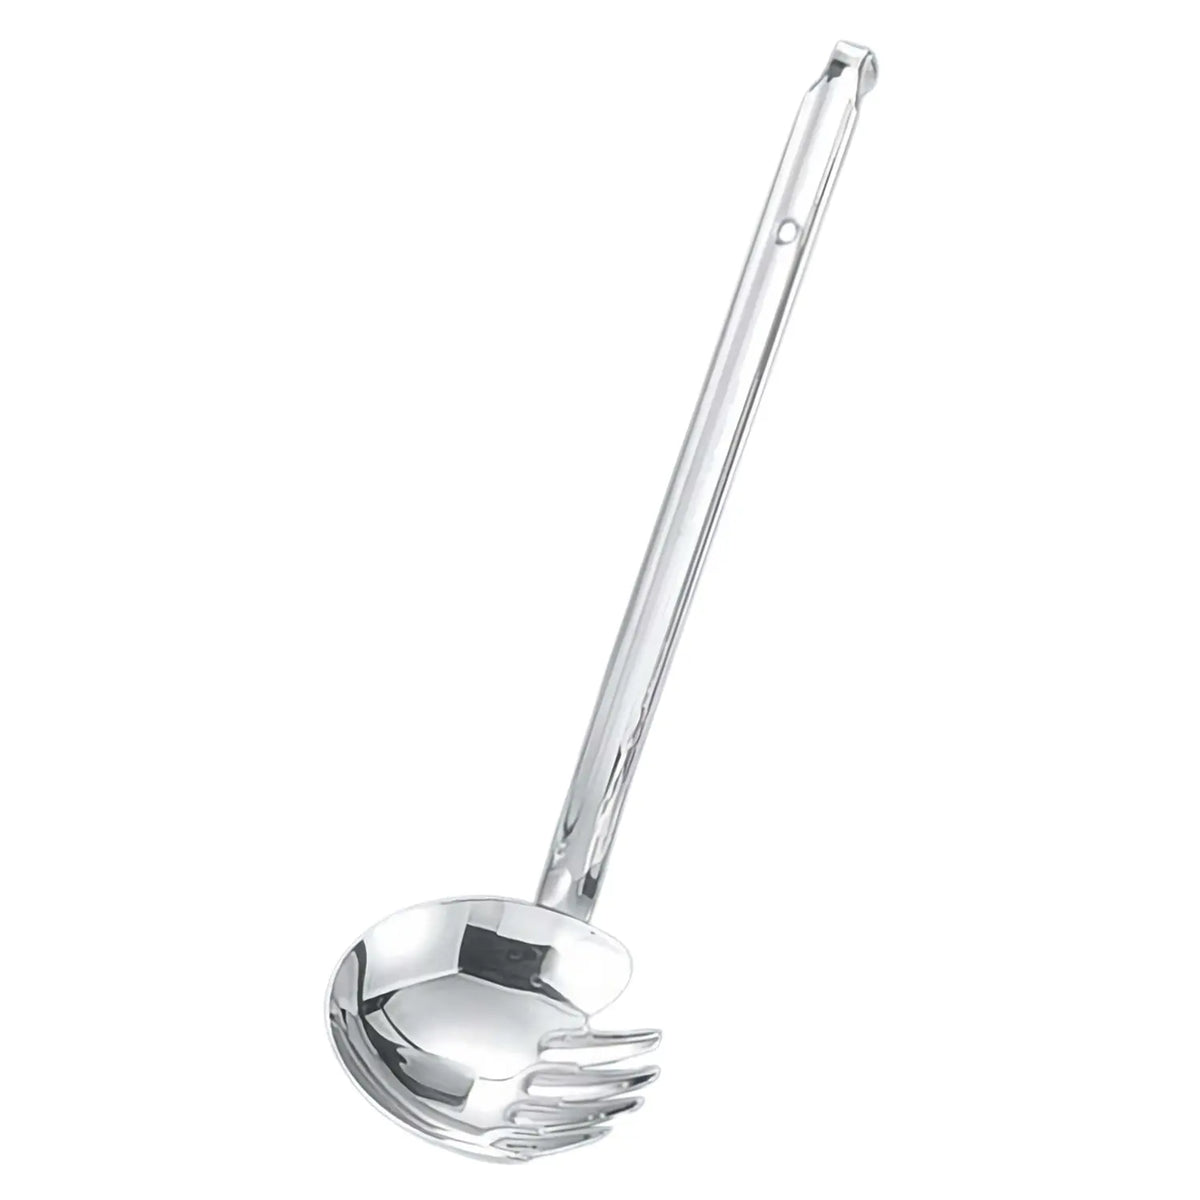 MARUTAMA Stainless Steel Brazed Ladle for Udon